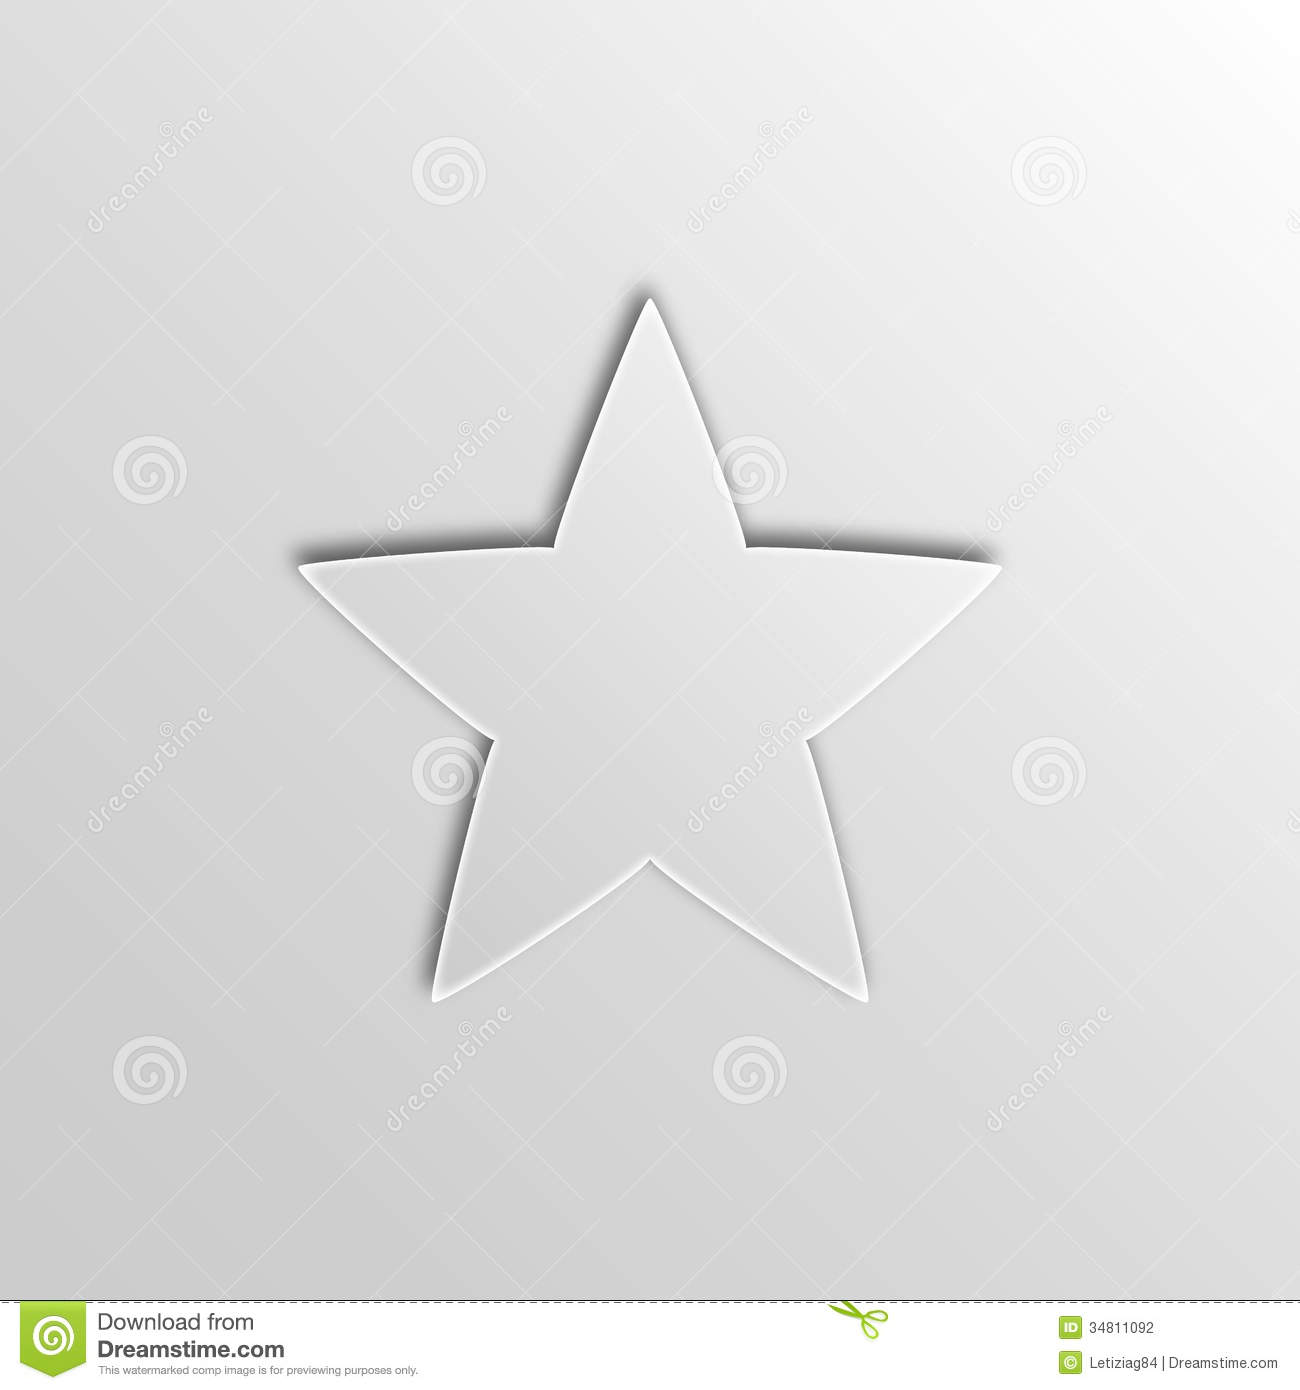 Five-Pointed Star Designs